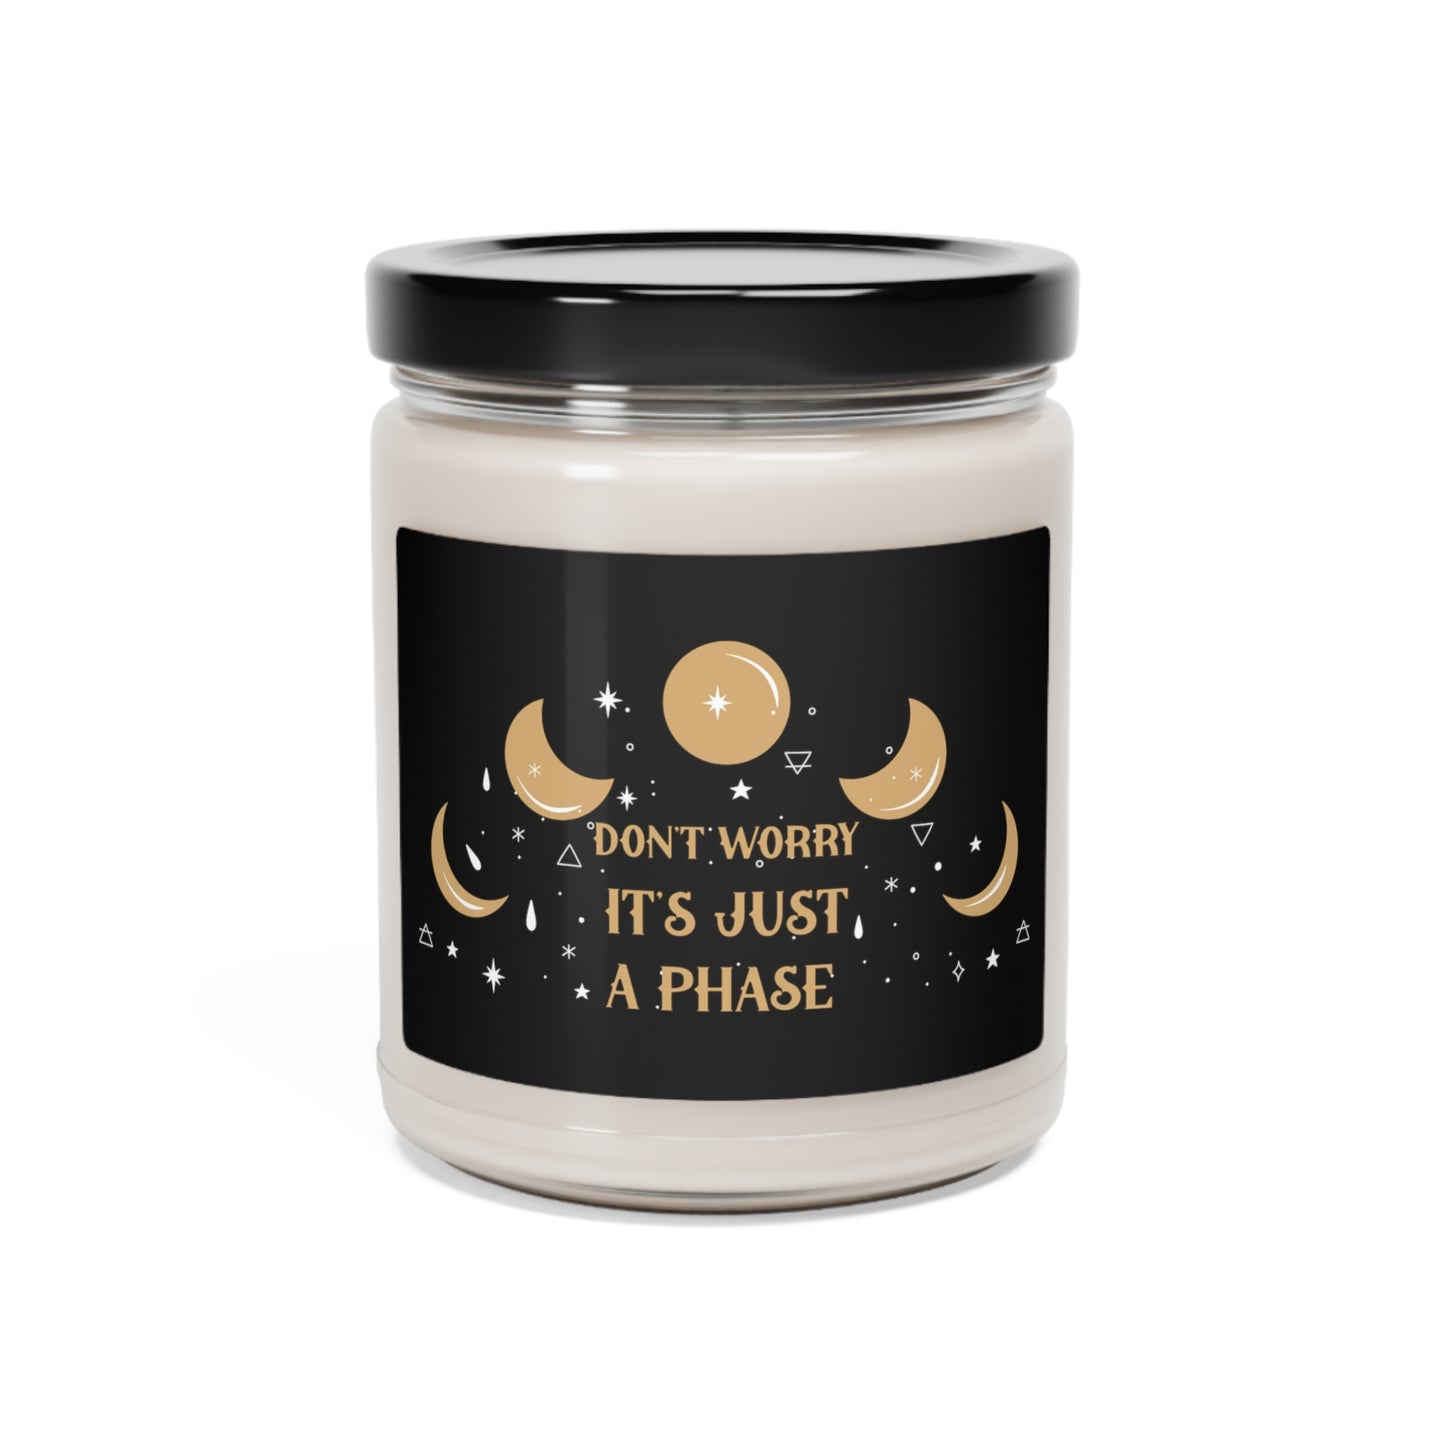 Its Just a Phase Scented Soy Candle, 9oz